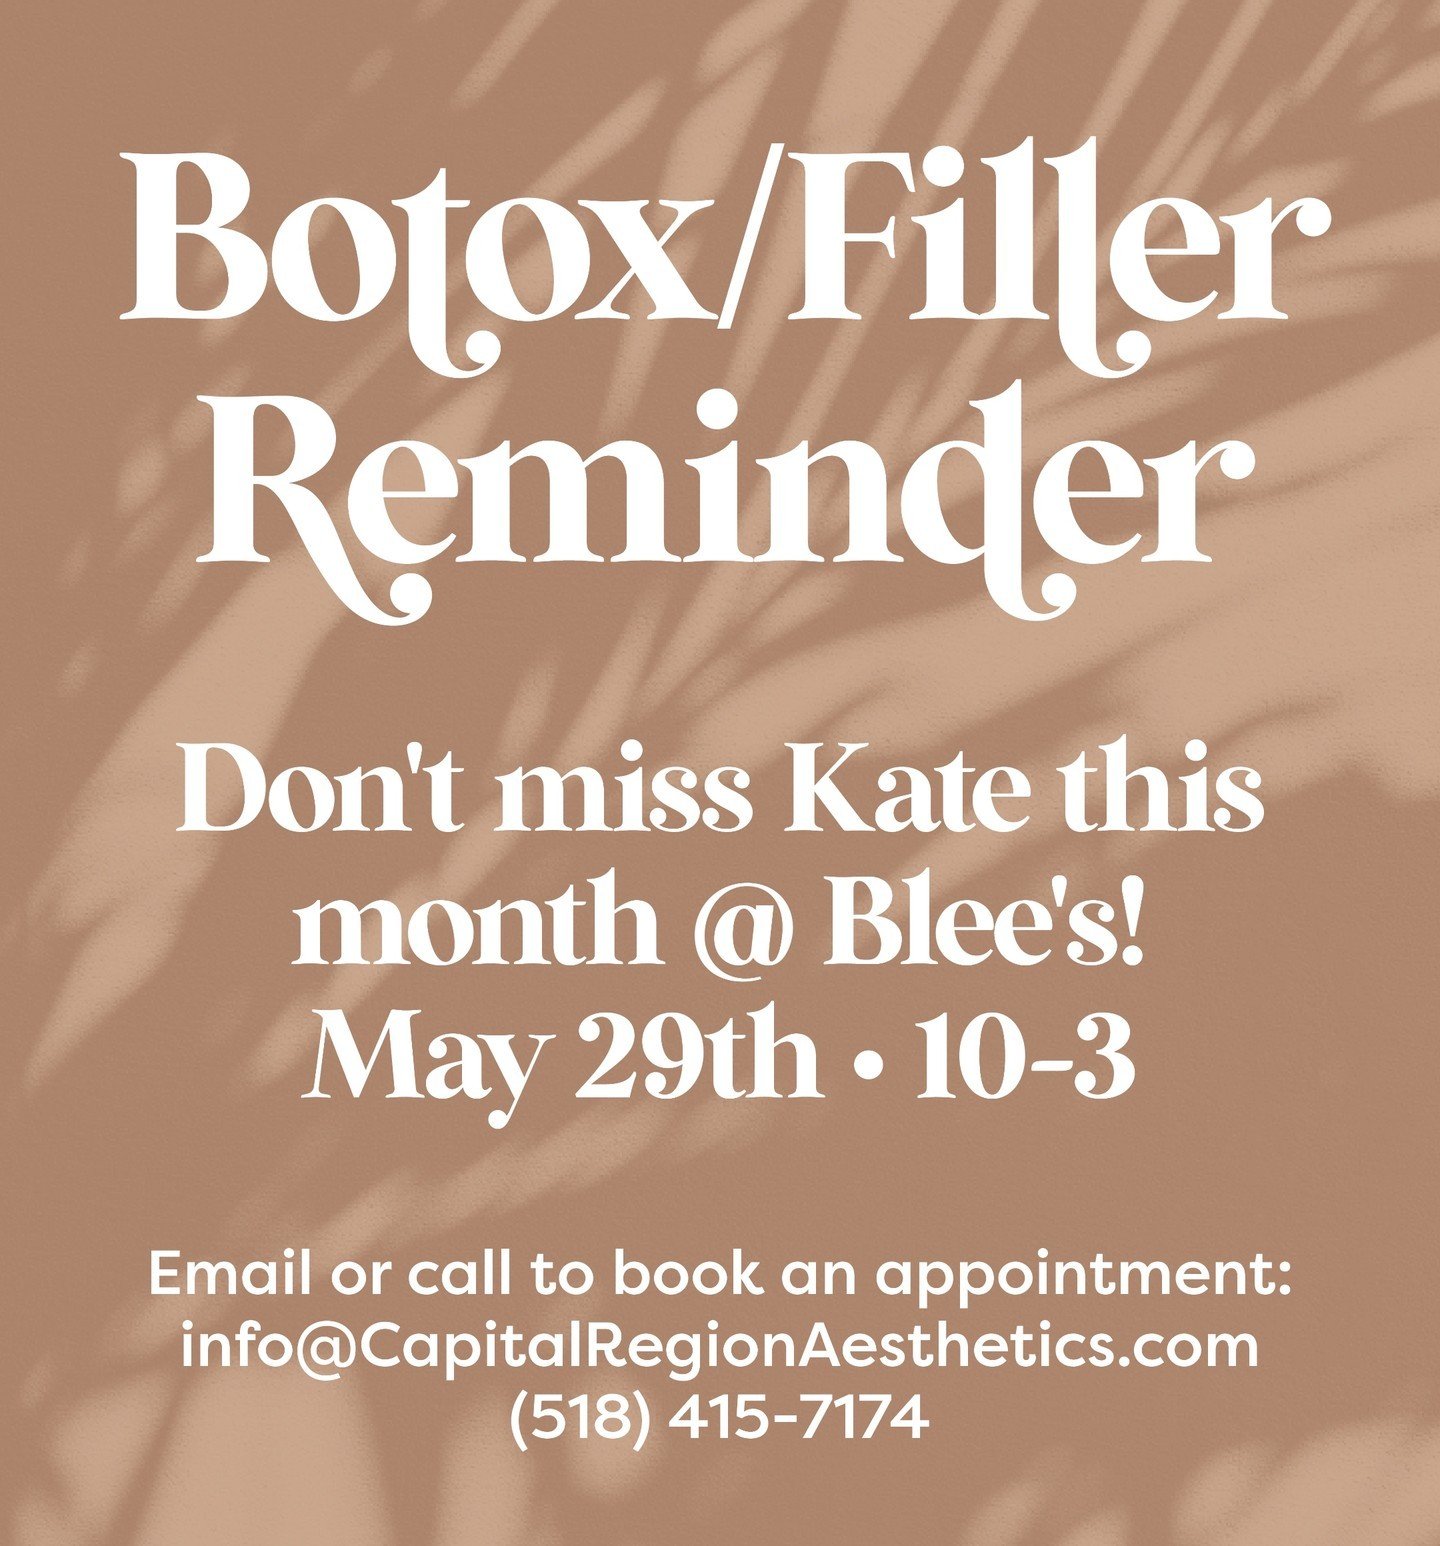 Don't forget to book with Kate while she's here on the 29th! Spots will fill up fast. Call or email Kate if you are ready to book or have any questions. #esthetician #aesthetician #aestheticianlife #licensedesthetician #skinexpert #skincareprofession